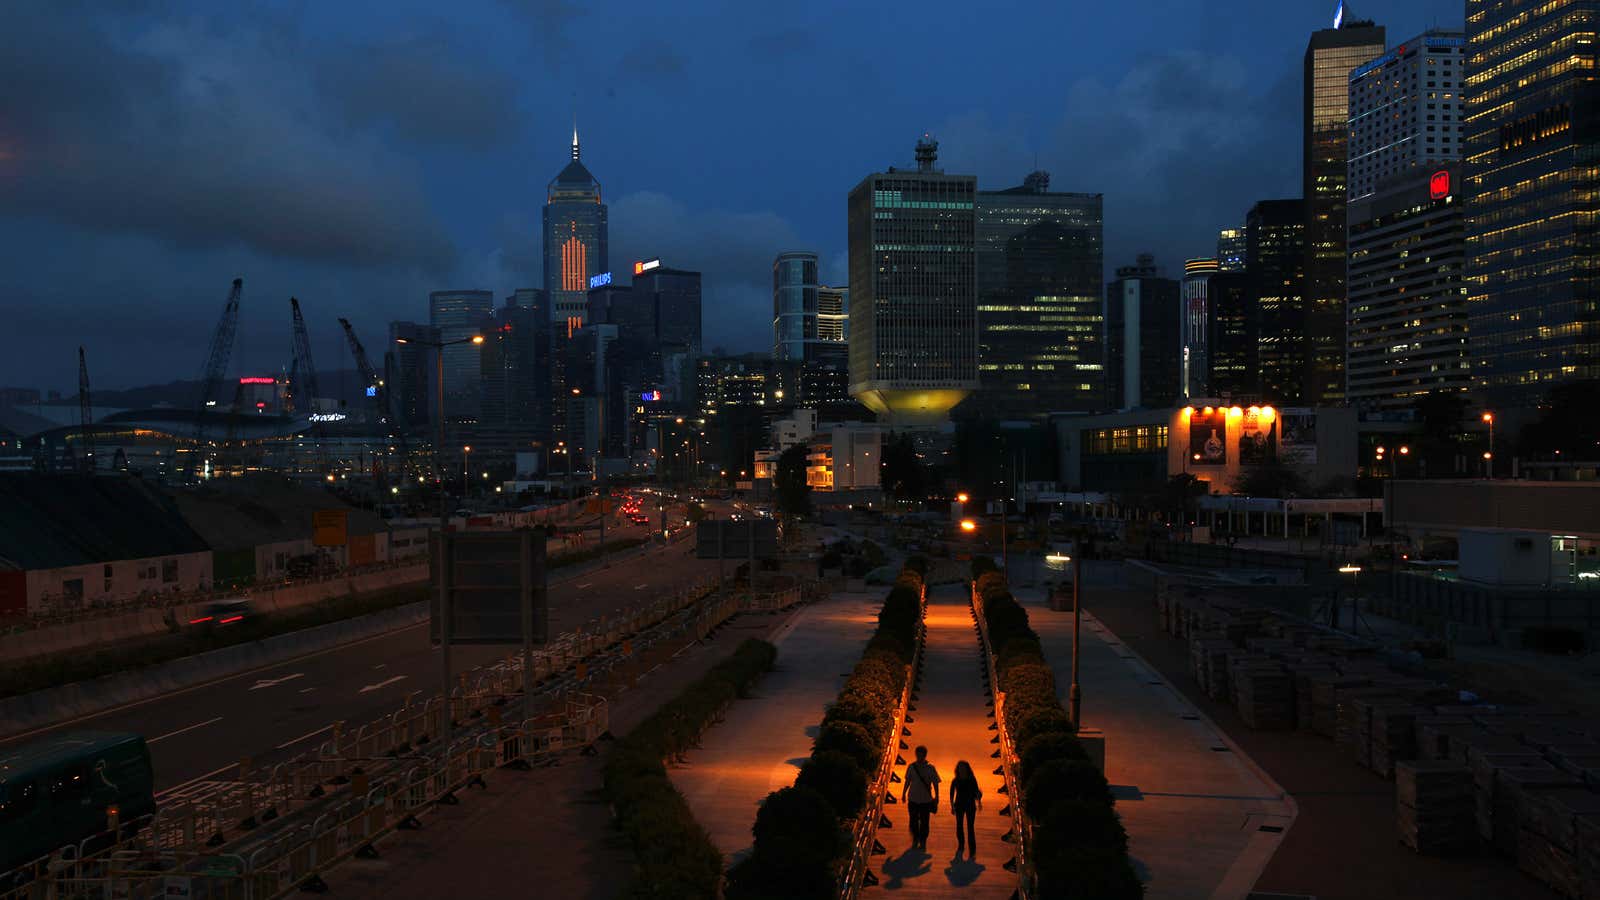 Are there dark days ahead for Asia’s biggest financial market?